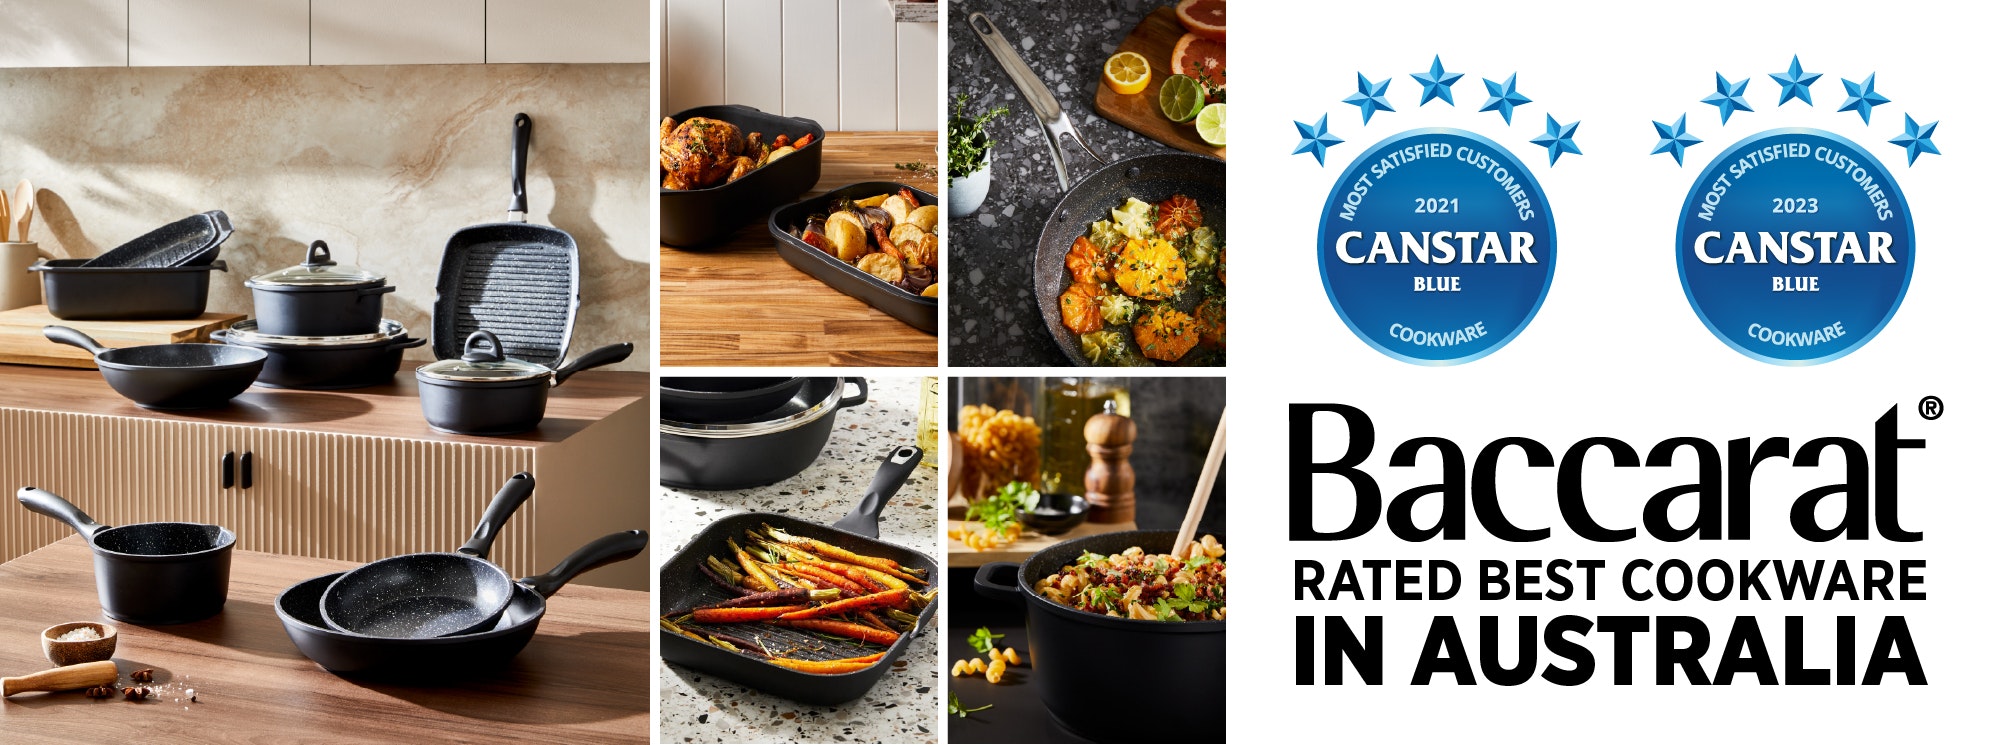 Baccarat - Best Rated Cookware in Australia